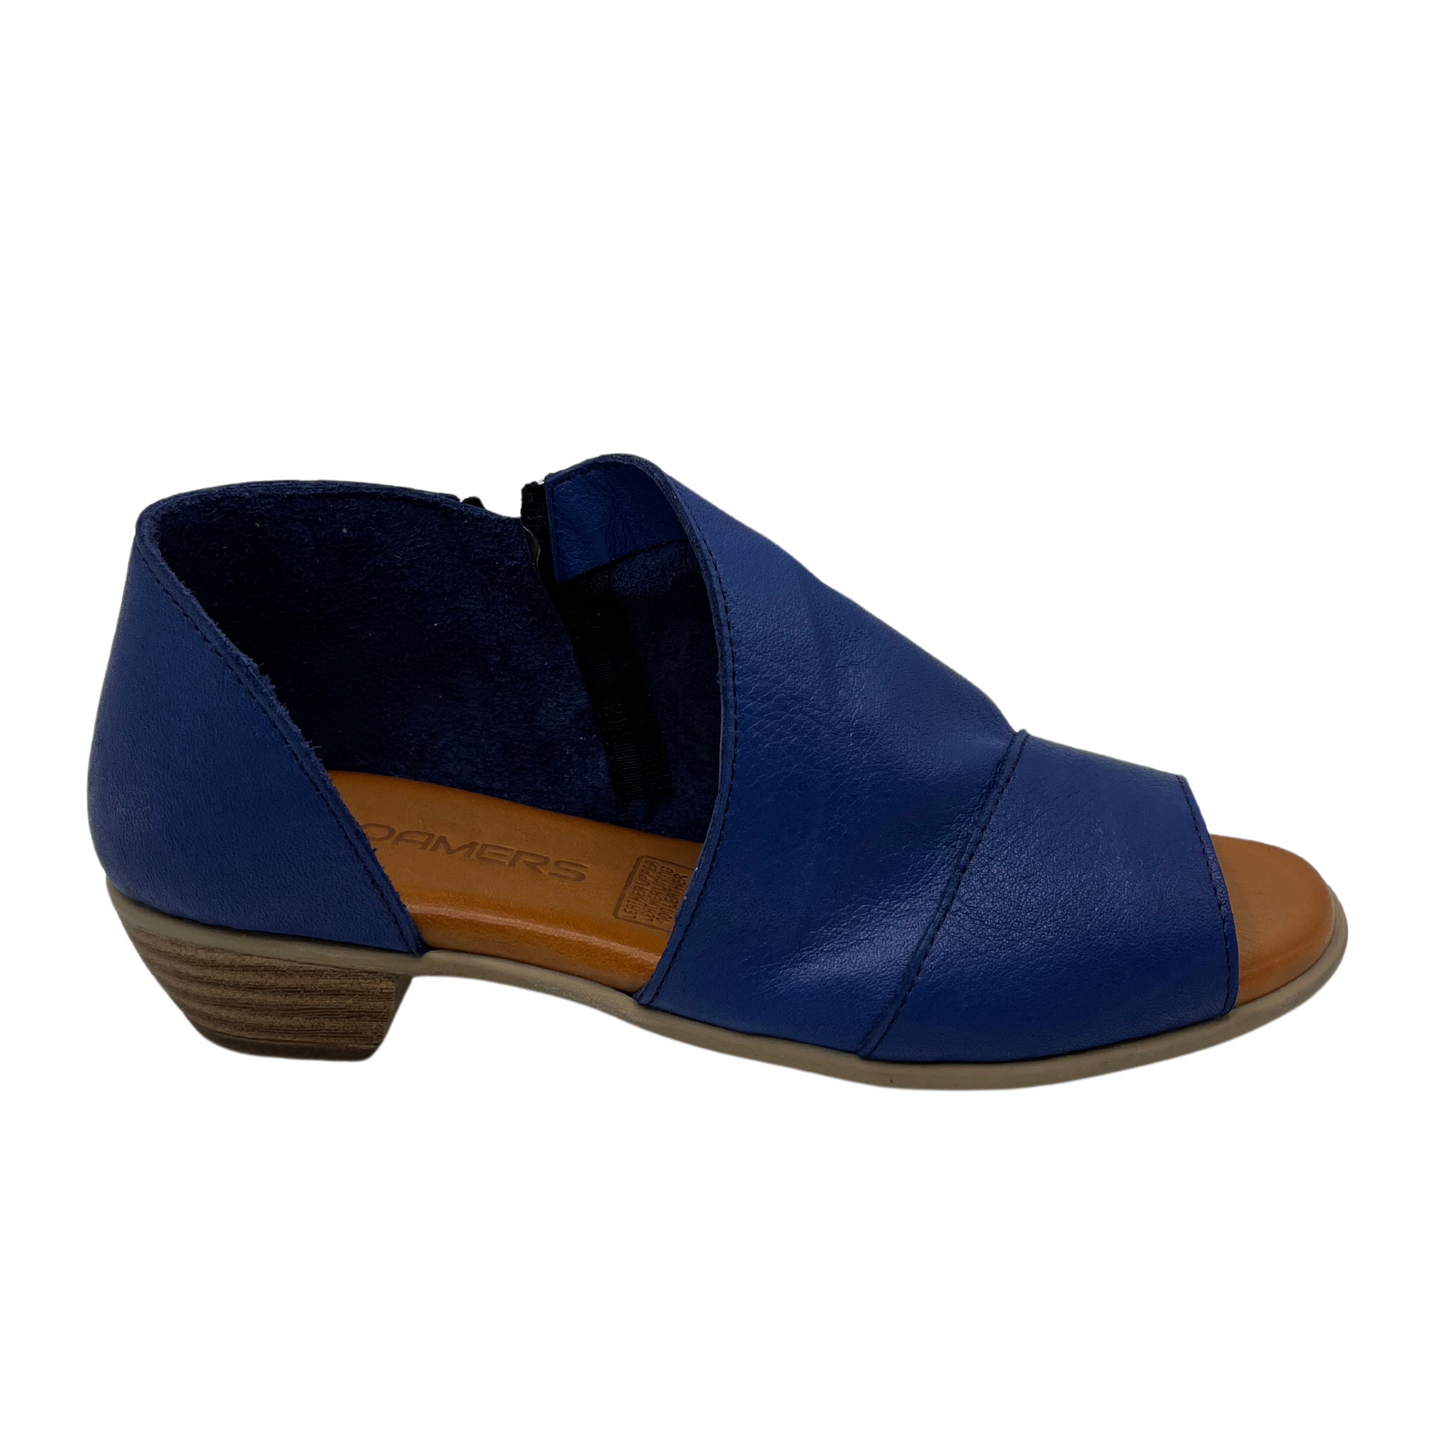 Right facing view of blue leather sandal with peep toe and short heel